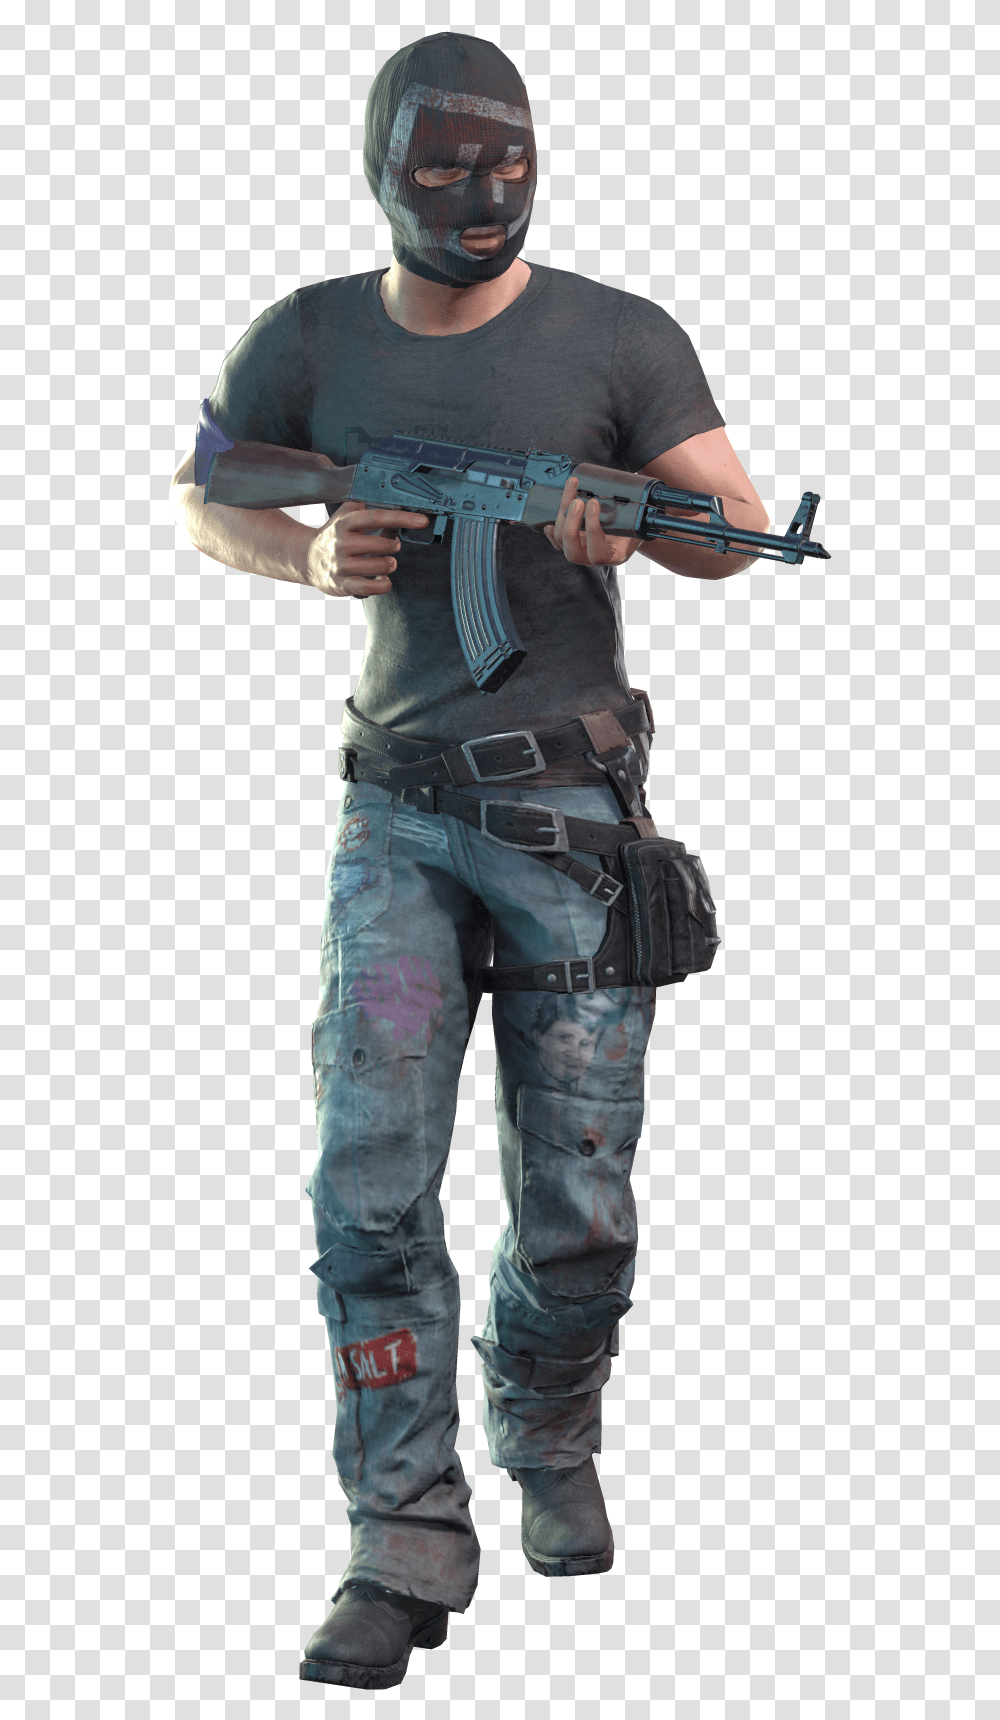 Player Unknown Battlegrounds Twitch Prime Player Unknown Battlegrounds, Person, Human, Weapon, Weaponry Transparent Png